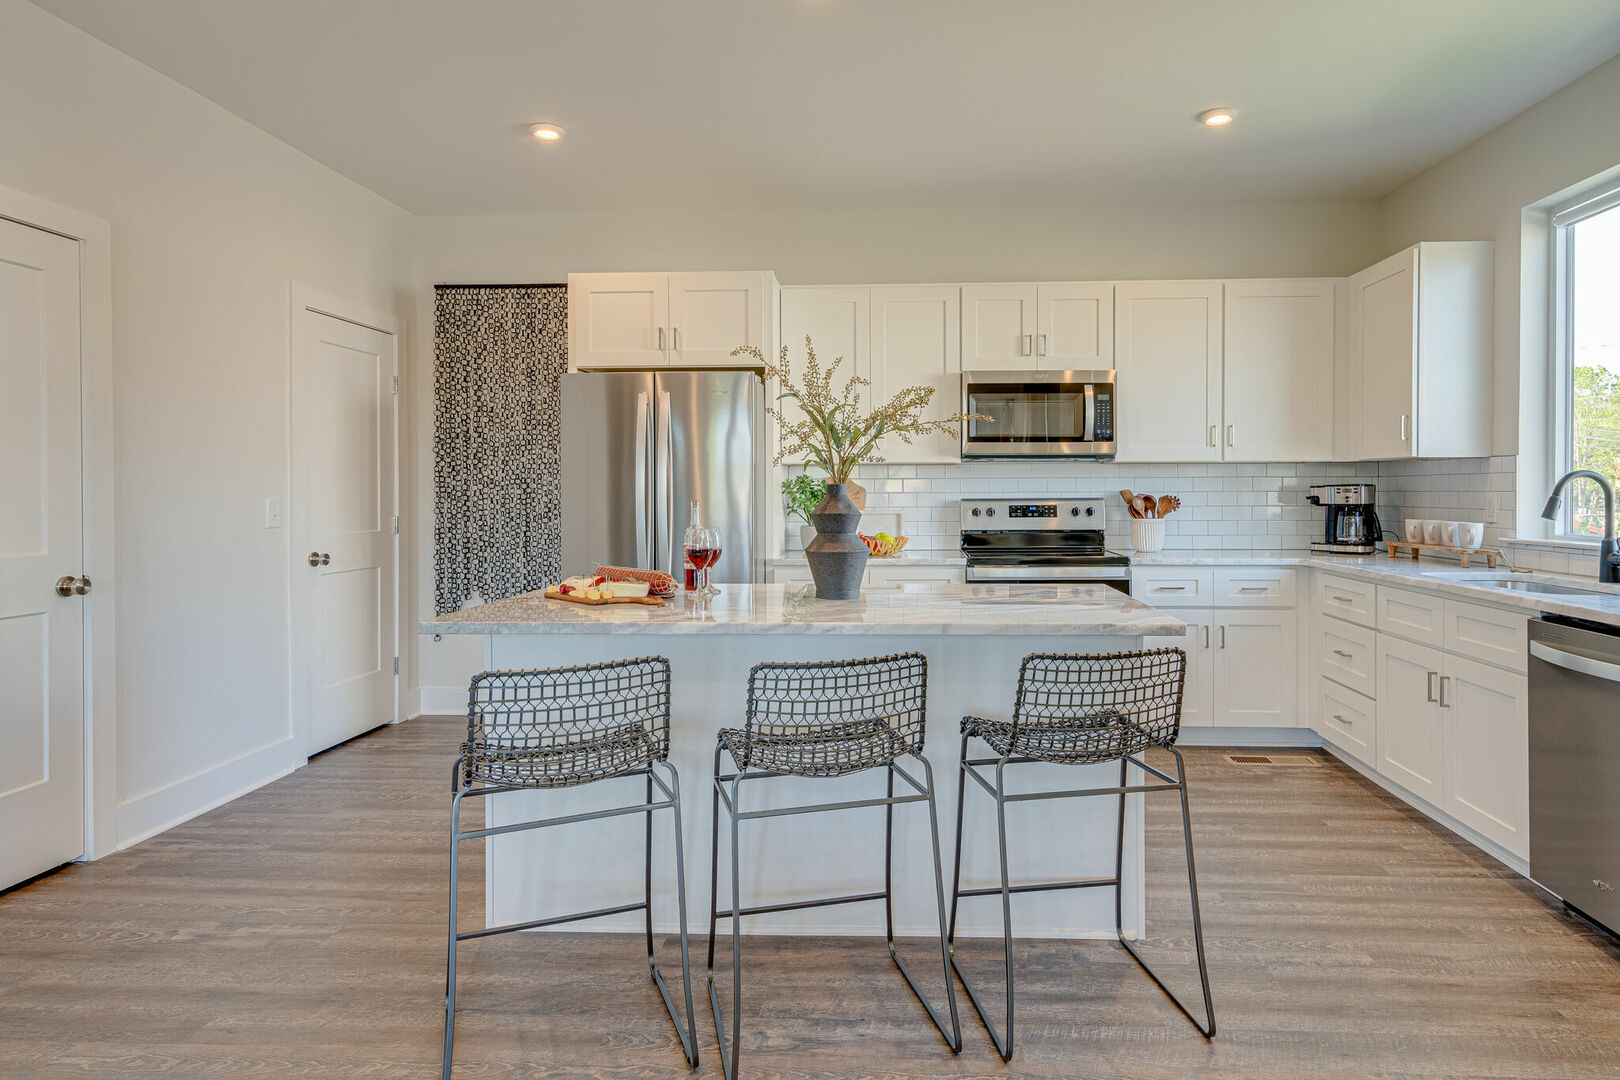 2nd floor: Fully equipped kitchen stocked with basic cooking essentials and stainless steel appliances.